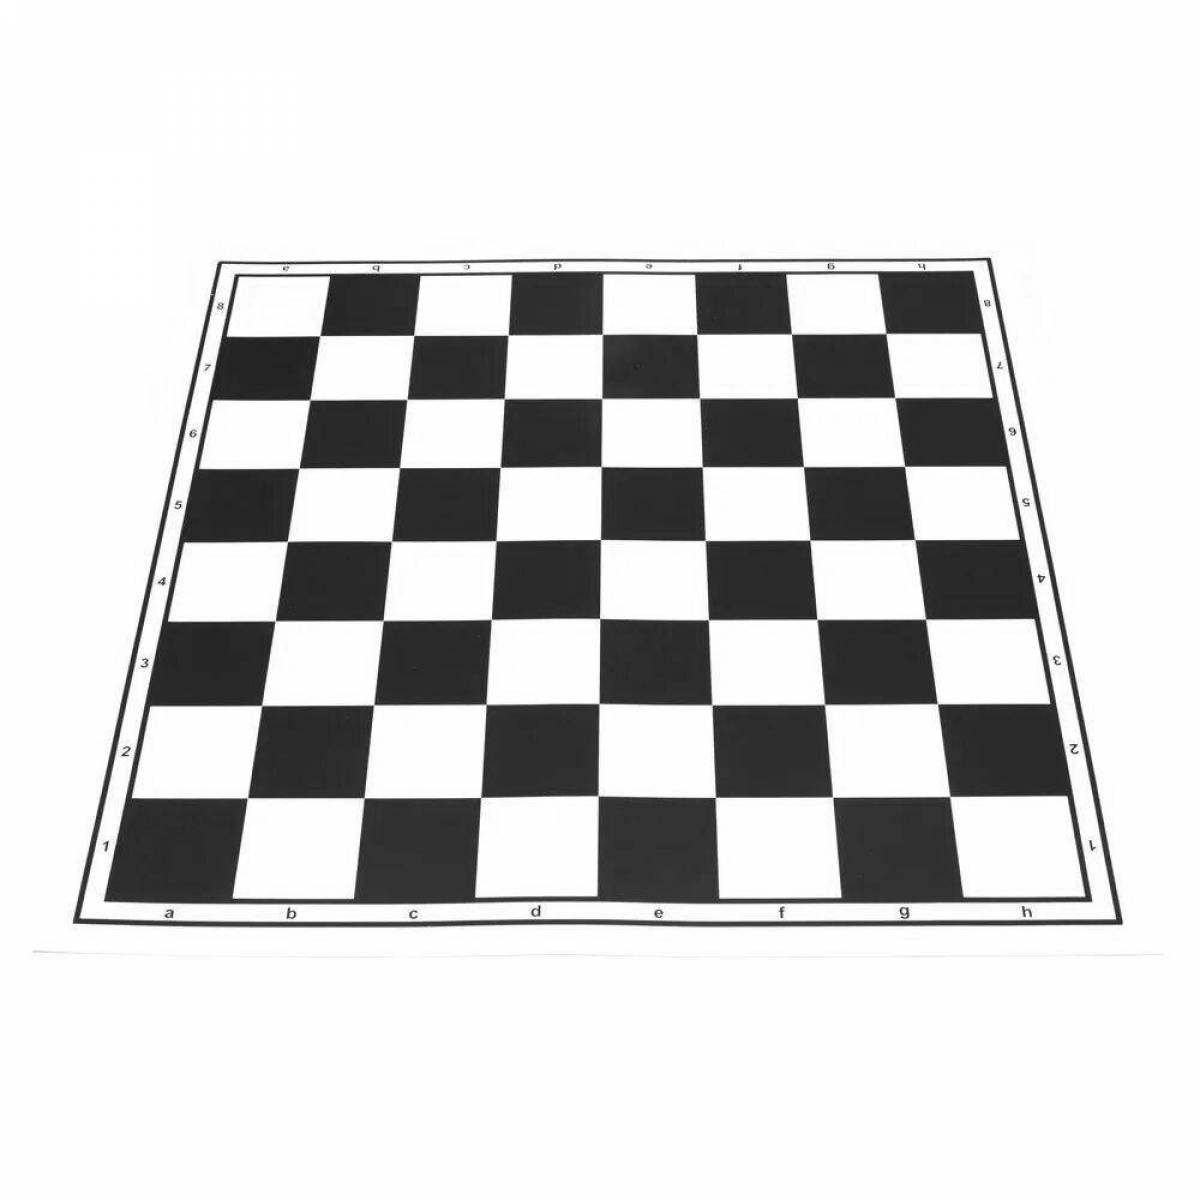 Creative chess coloring board for kids